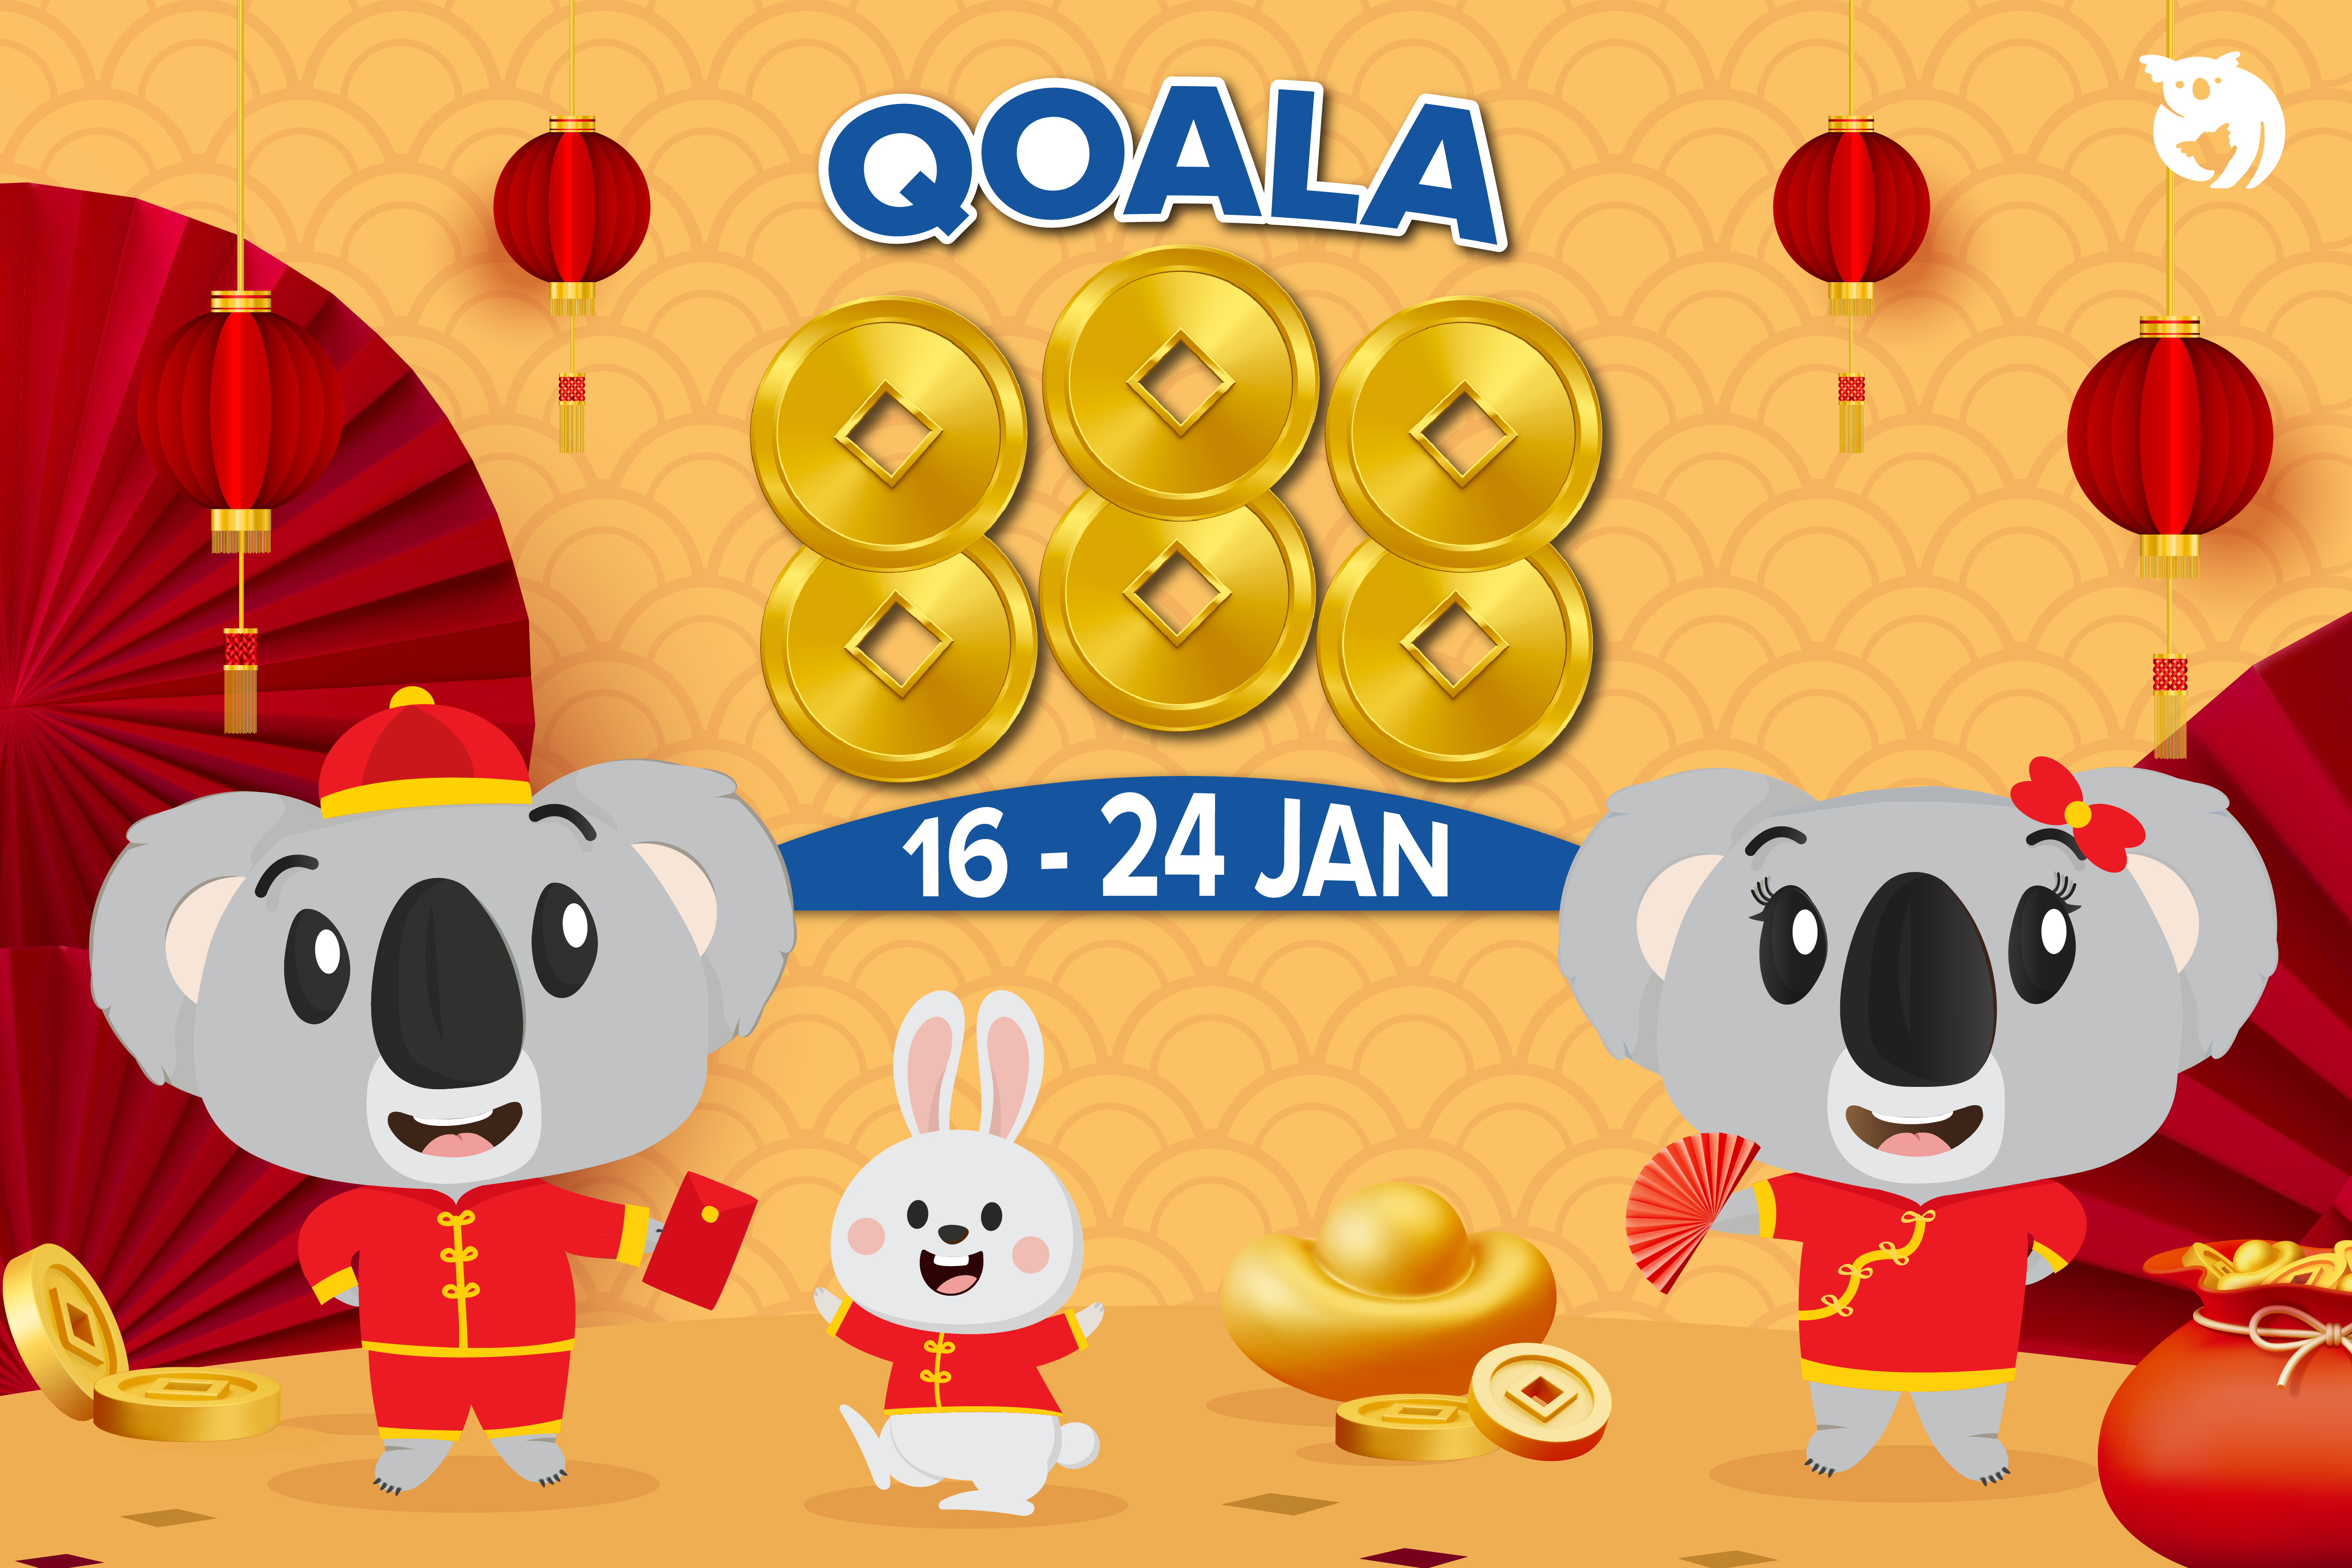 Qoala 888 More ONG, More HUAT! Exciting CNY Promo for You